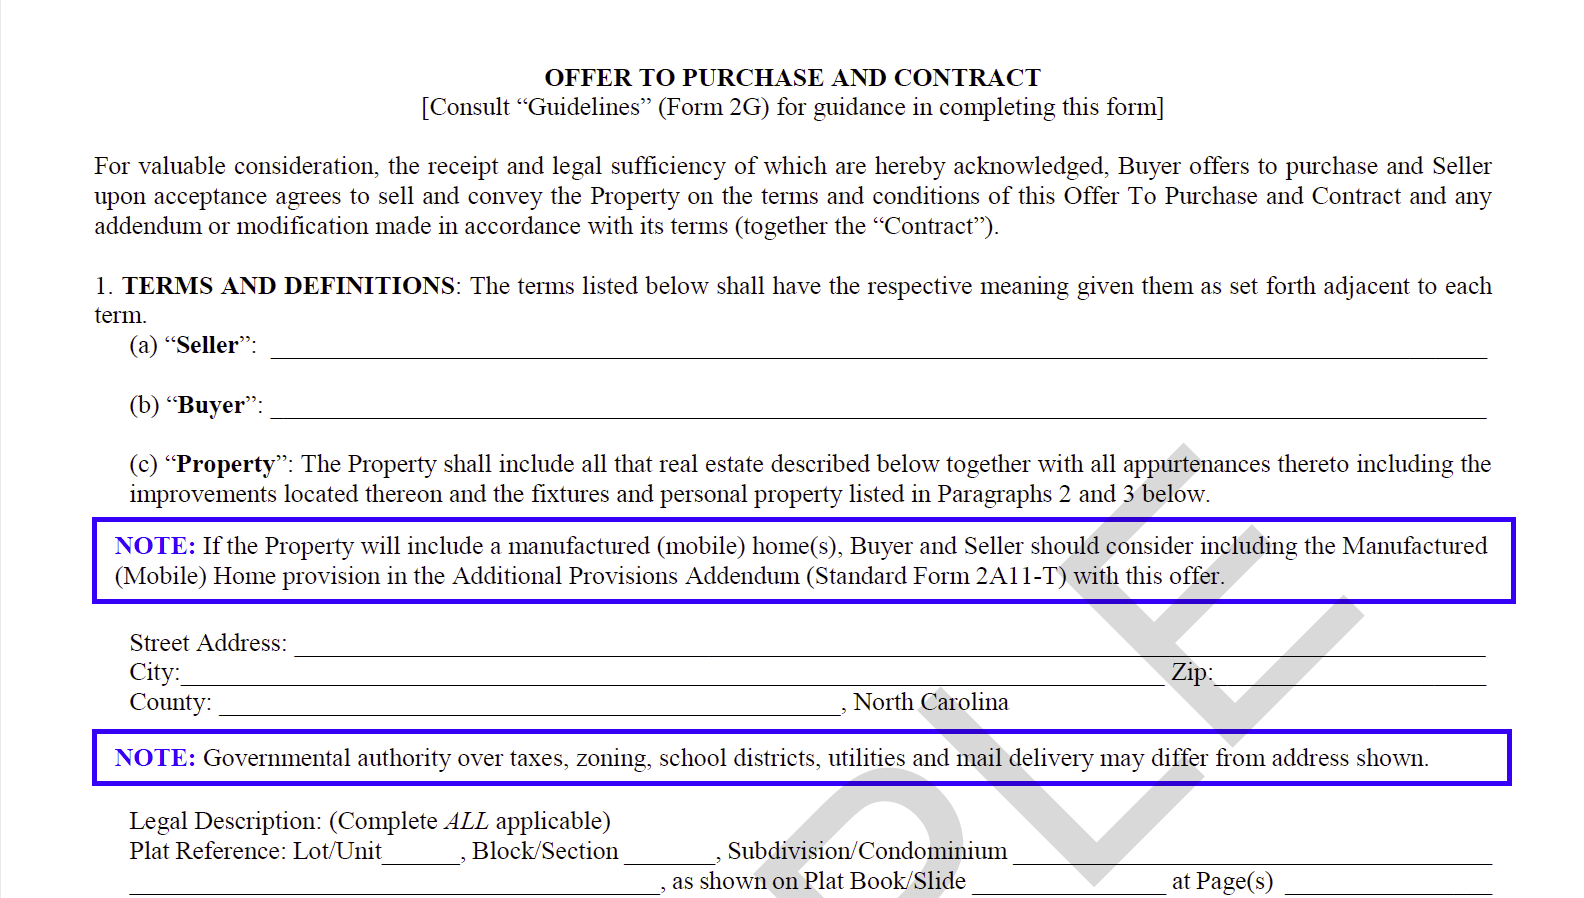 An image of a contract